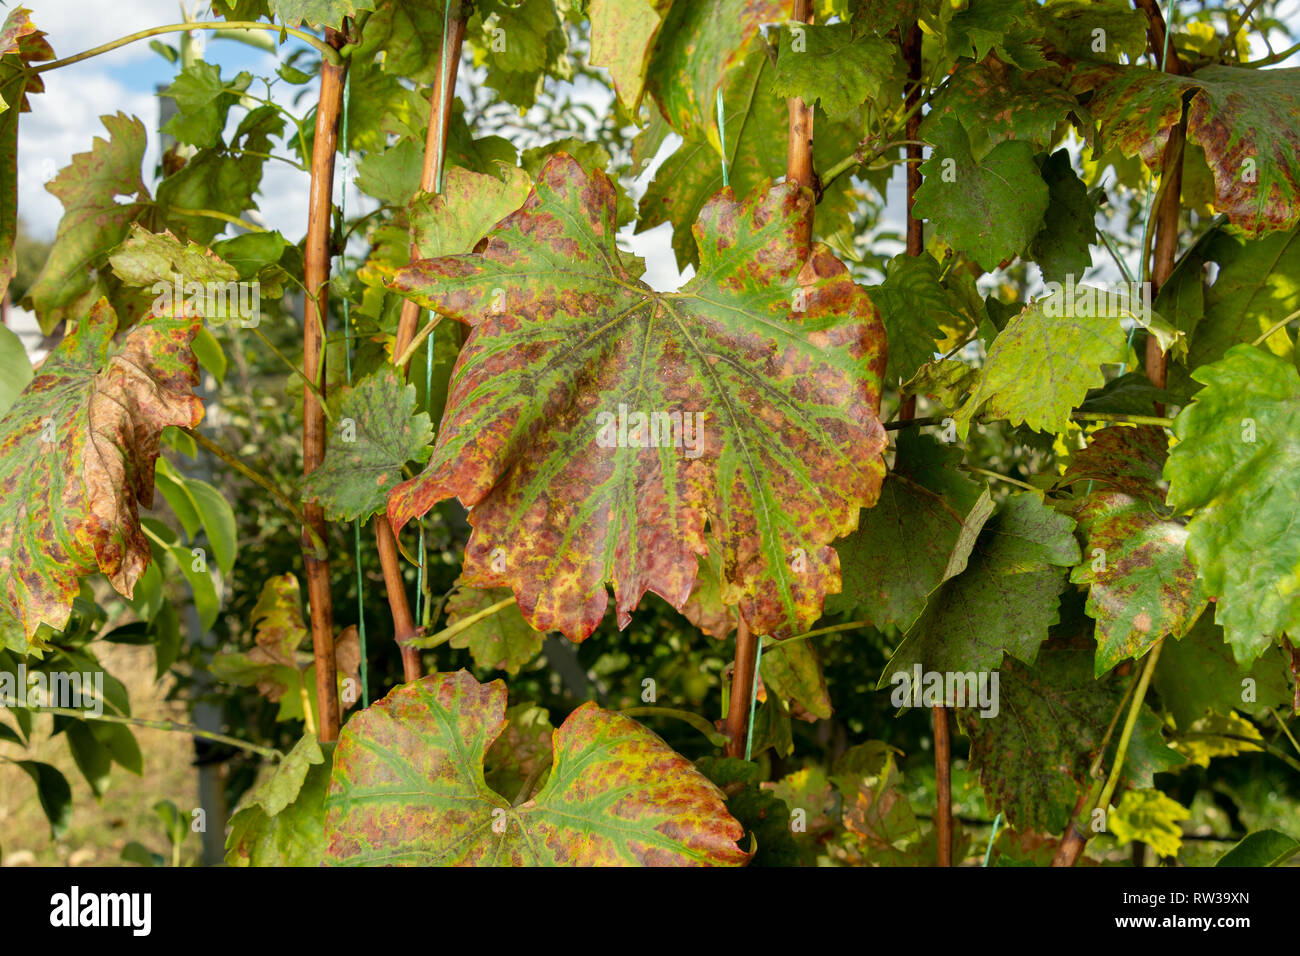 diseased affected leaf of grapes close-up macro. concept of protecting plantings of grapes from fungal diseases Stock Photo